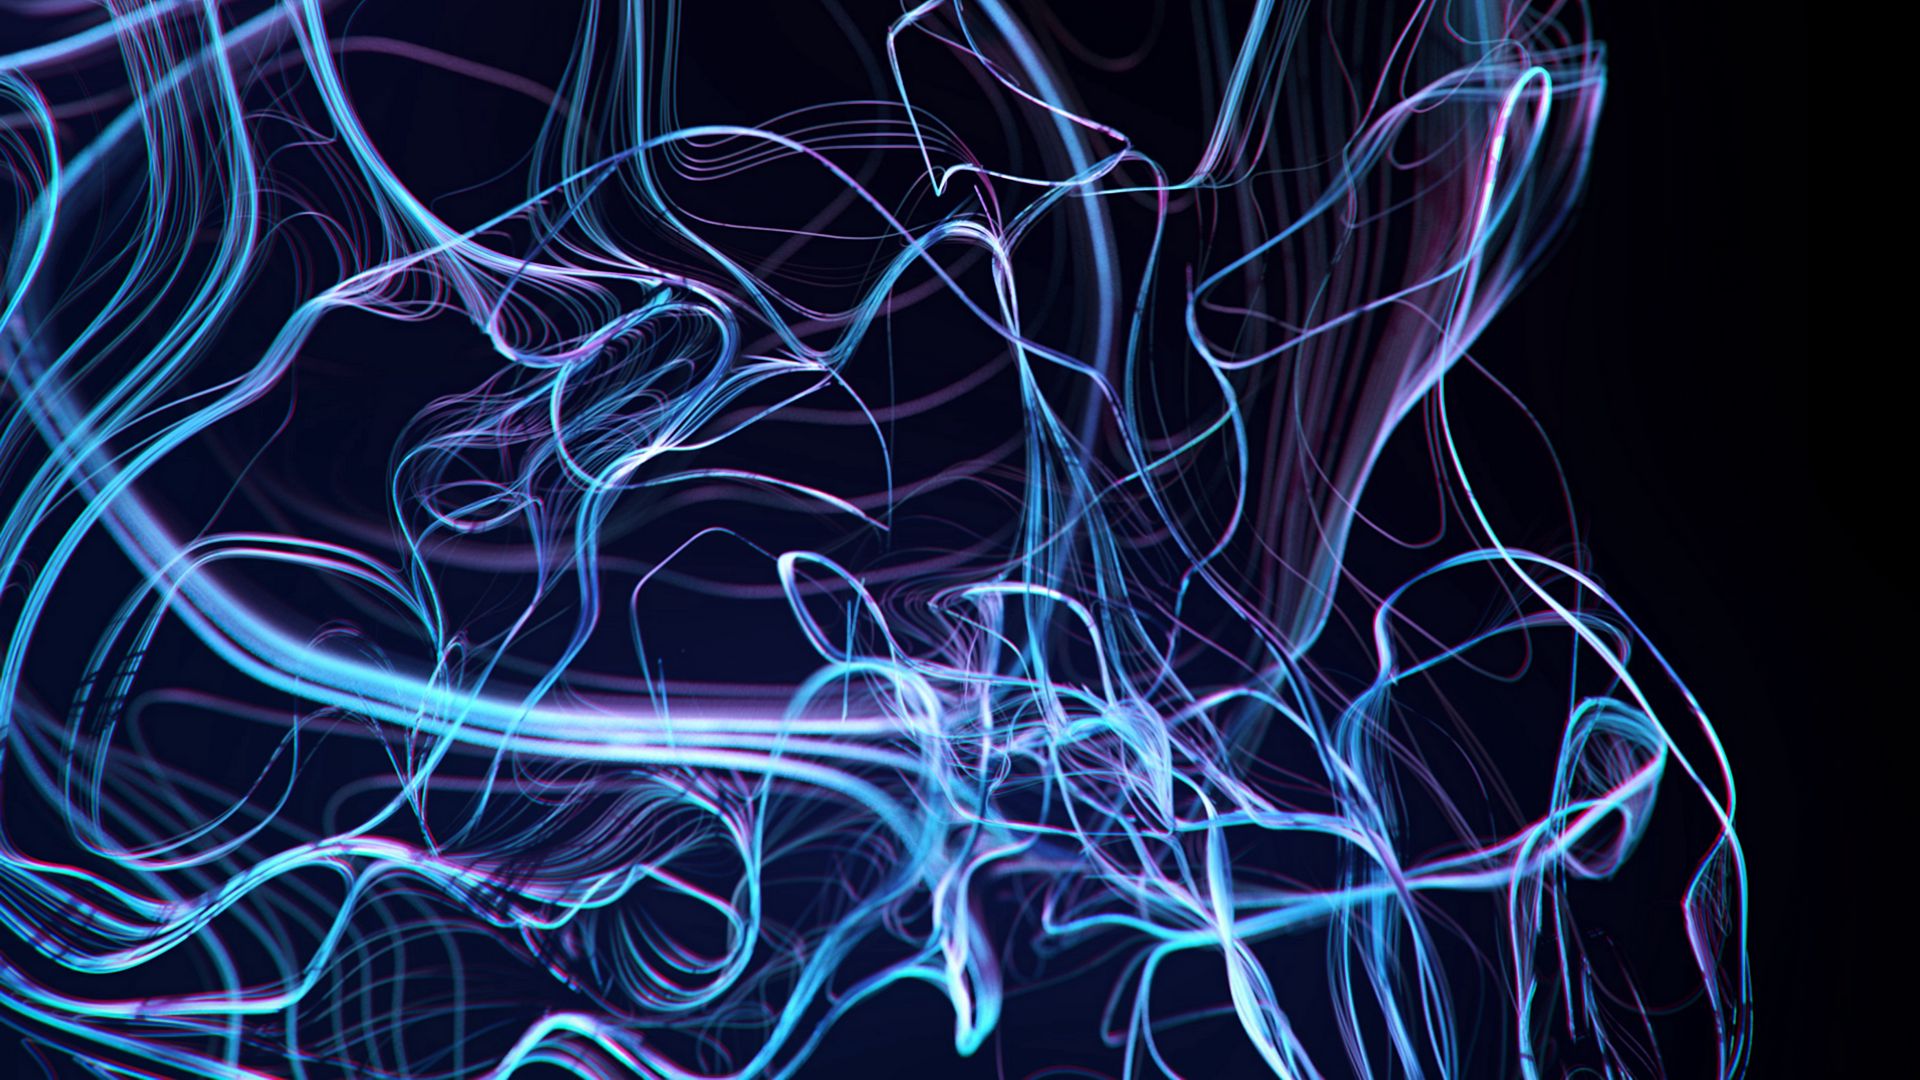 Download wallpaper 1920x1080 threads, tangled, glow, lines, abstraction  full hd, hdtv, fhd, 1080p hd background